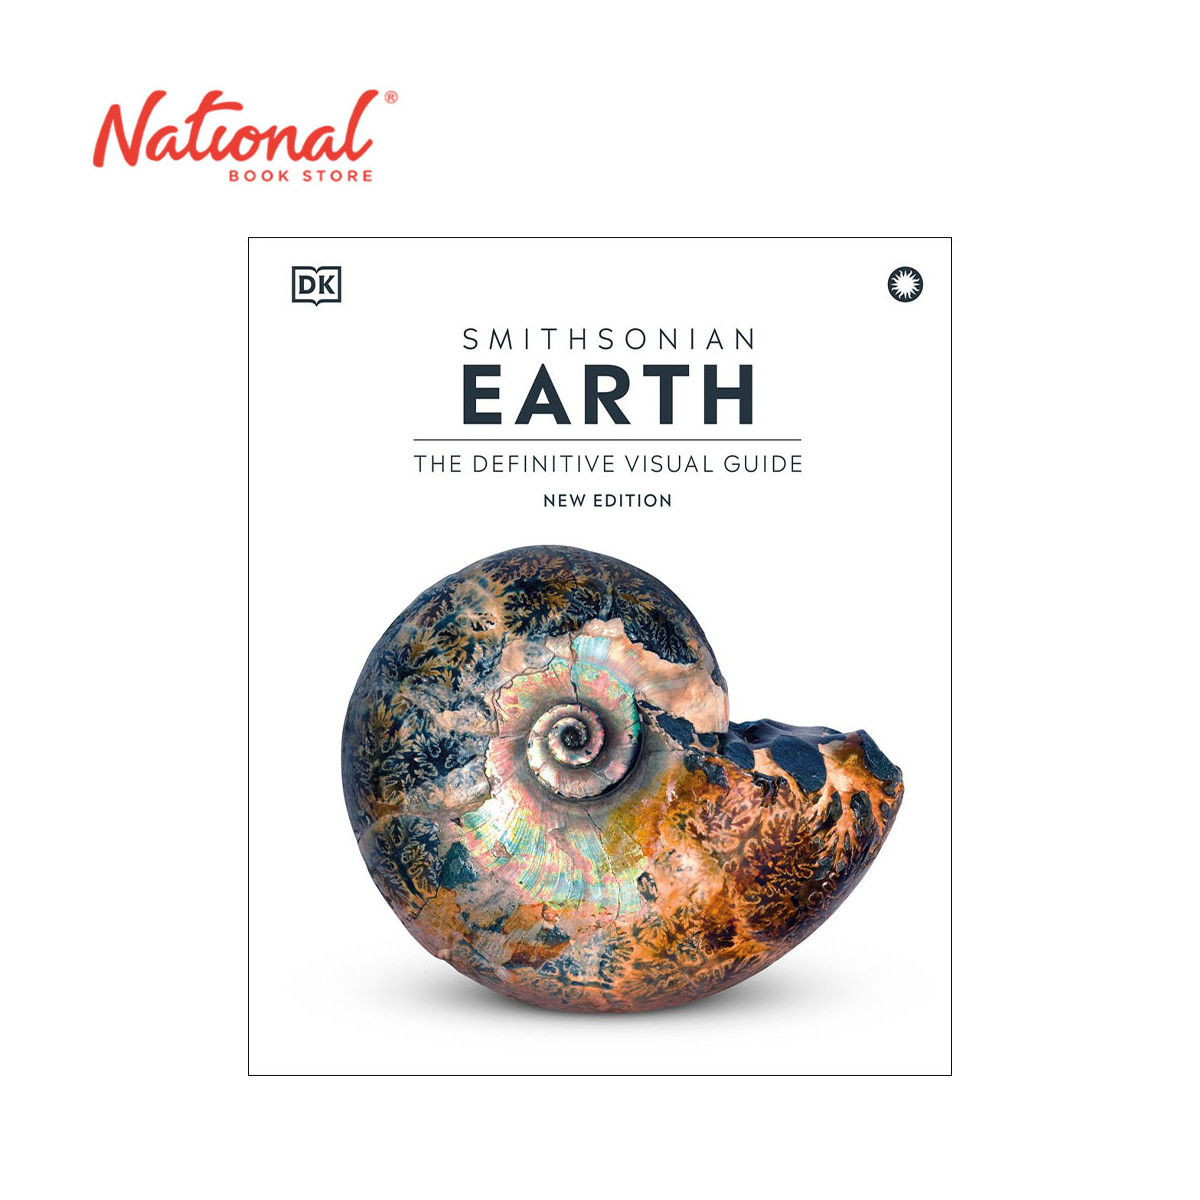 *PRE-ORDER* Earth by DK - Hardcover - Reference - Science & Nature